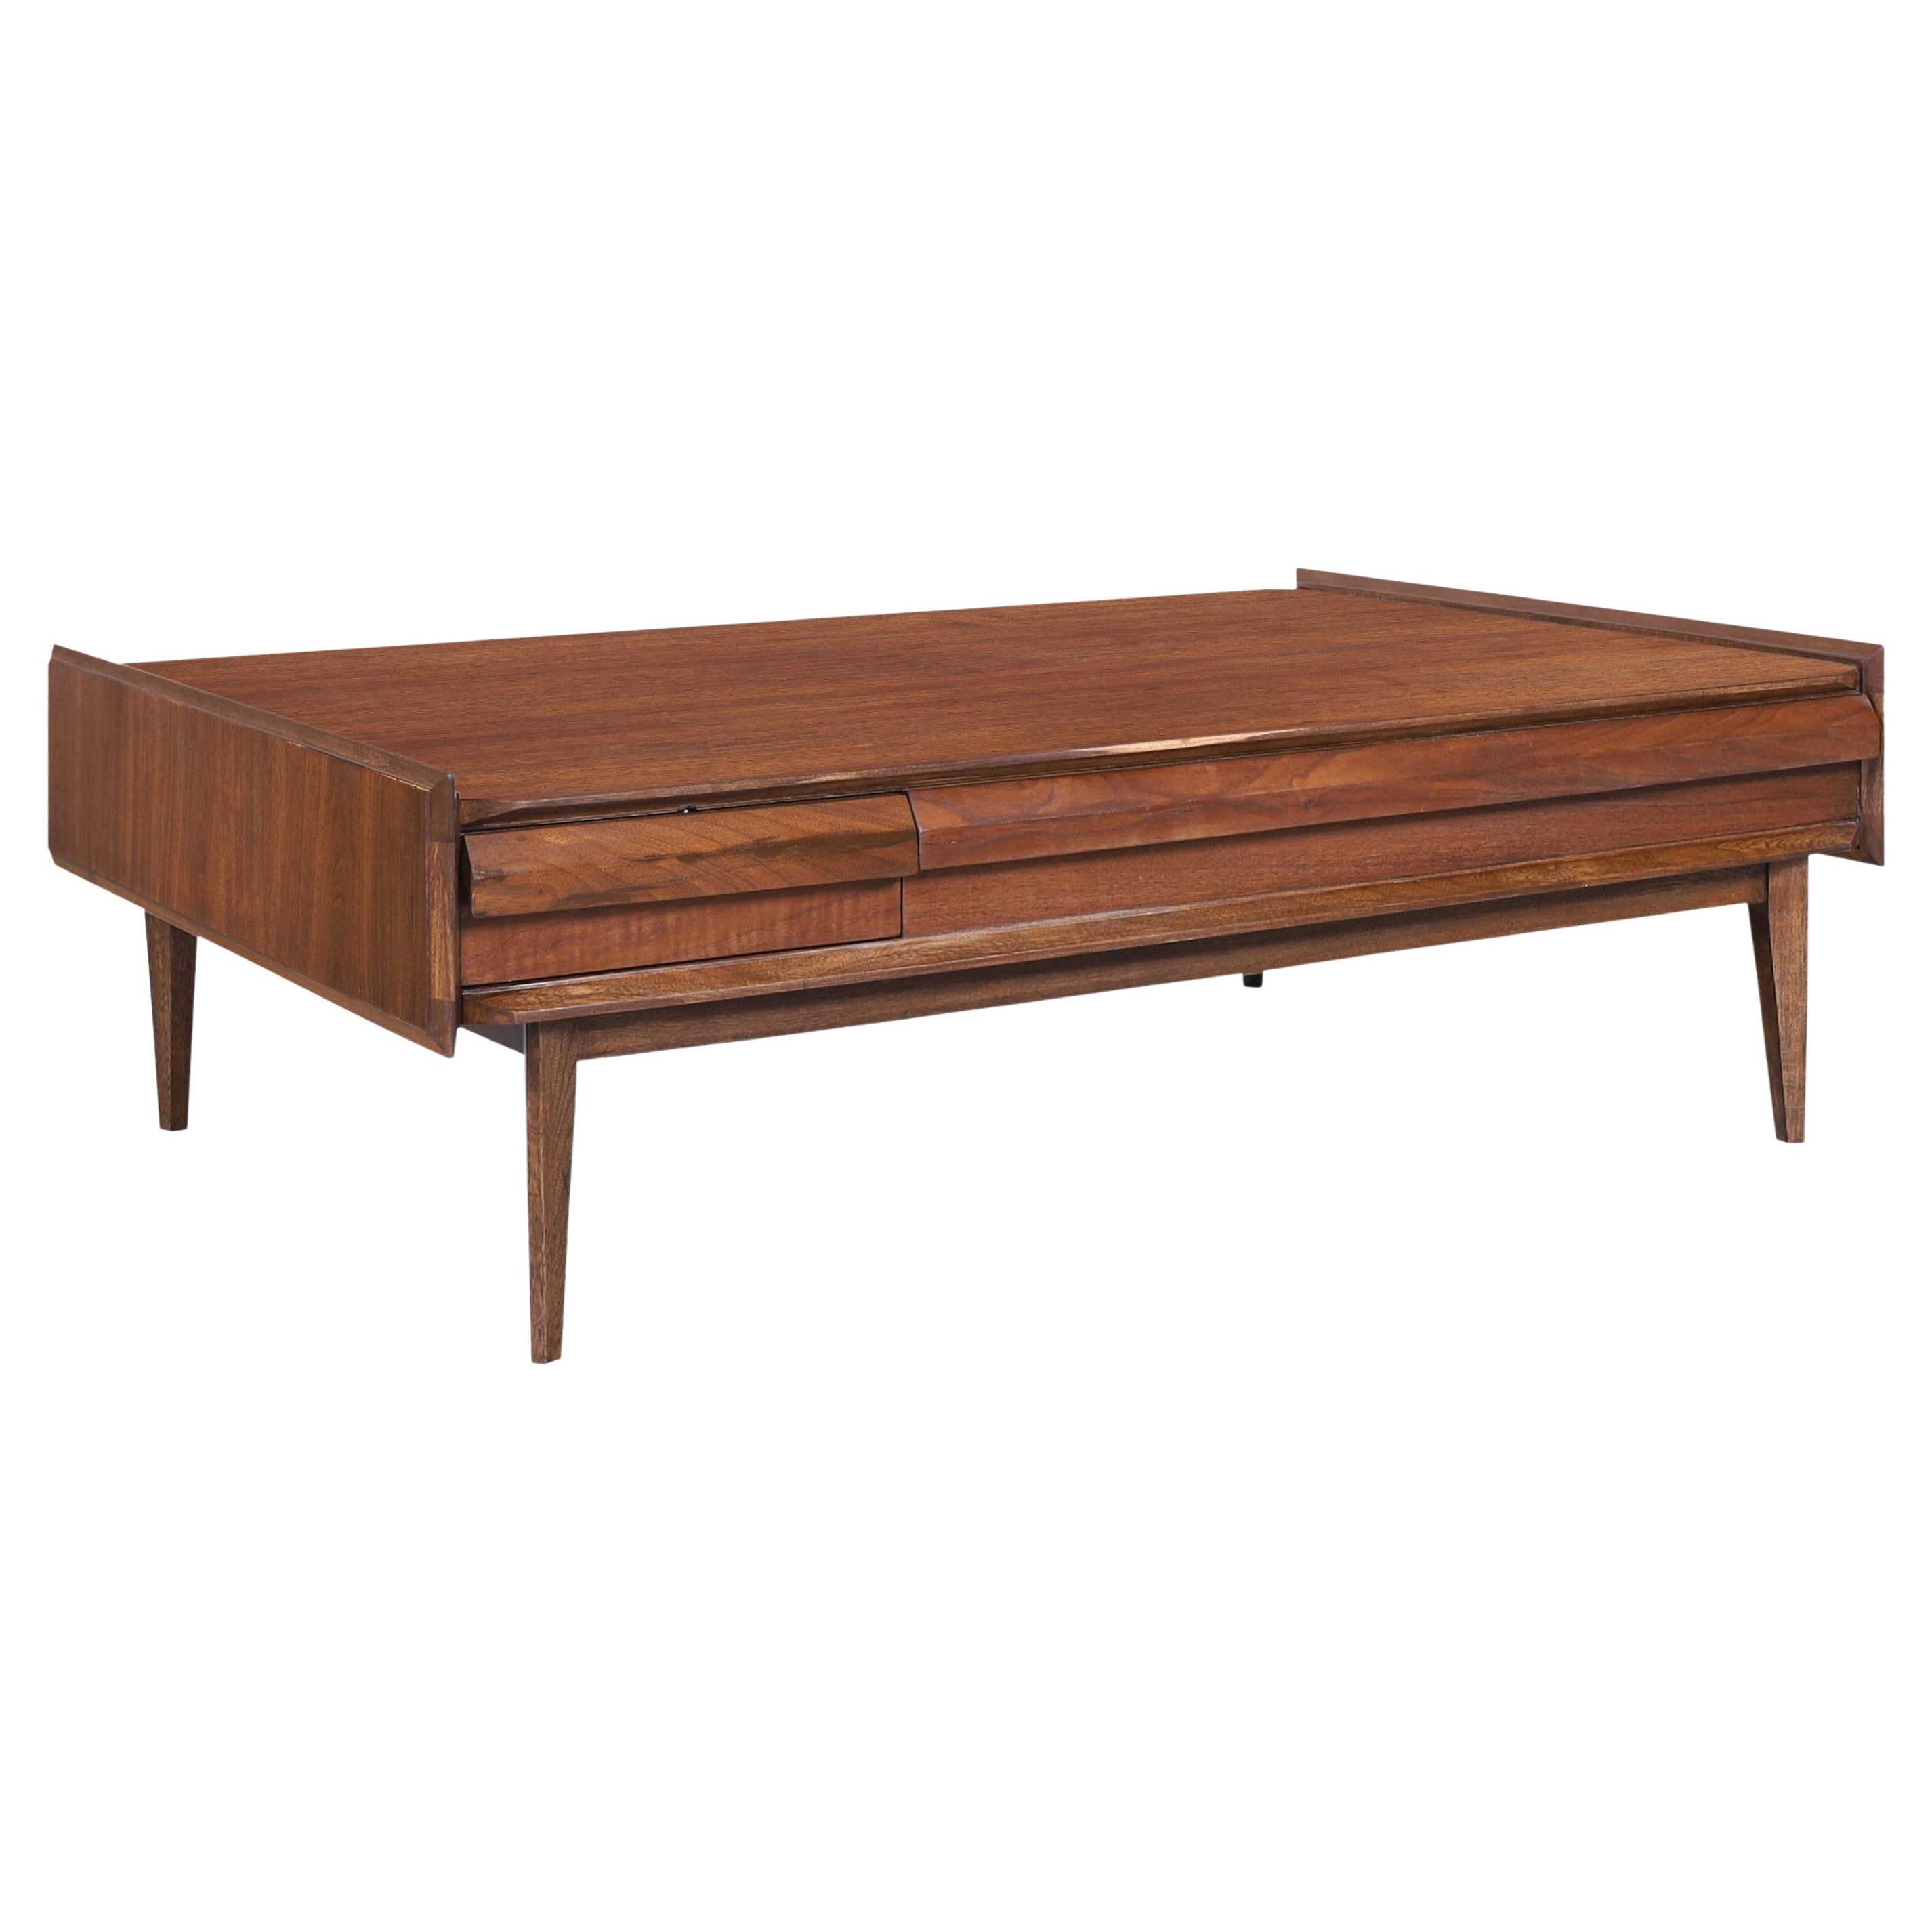 What is the difference between a coffee table and a cocktail table?